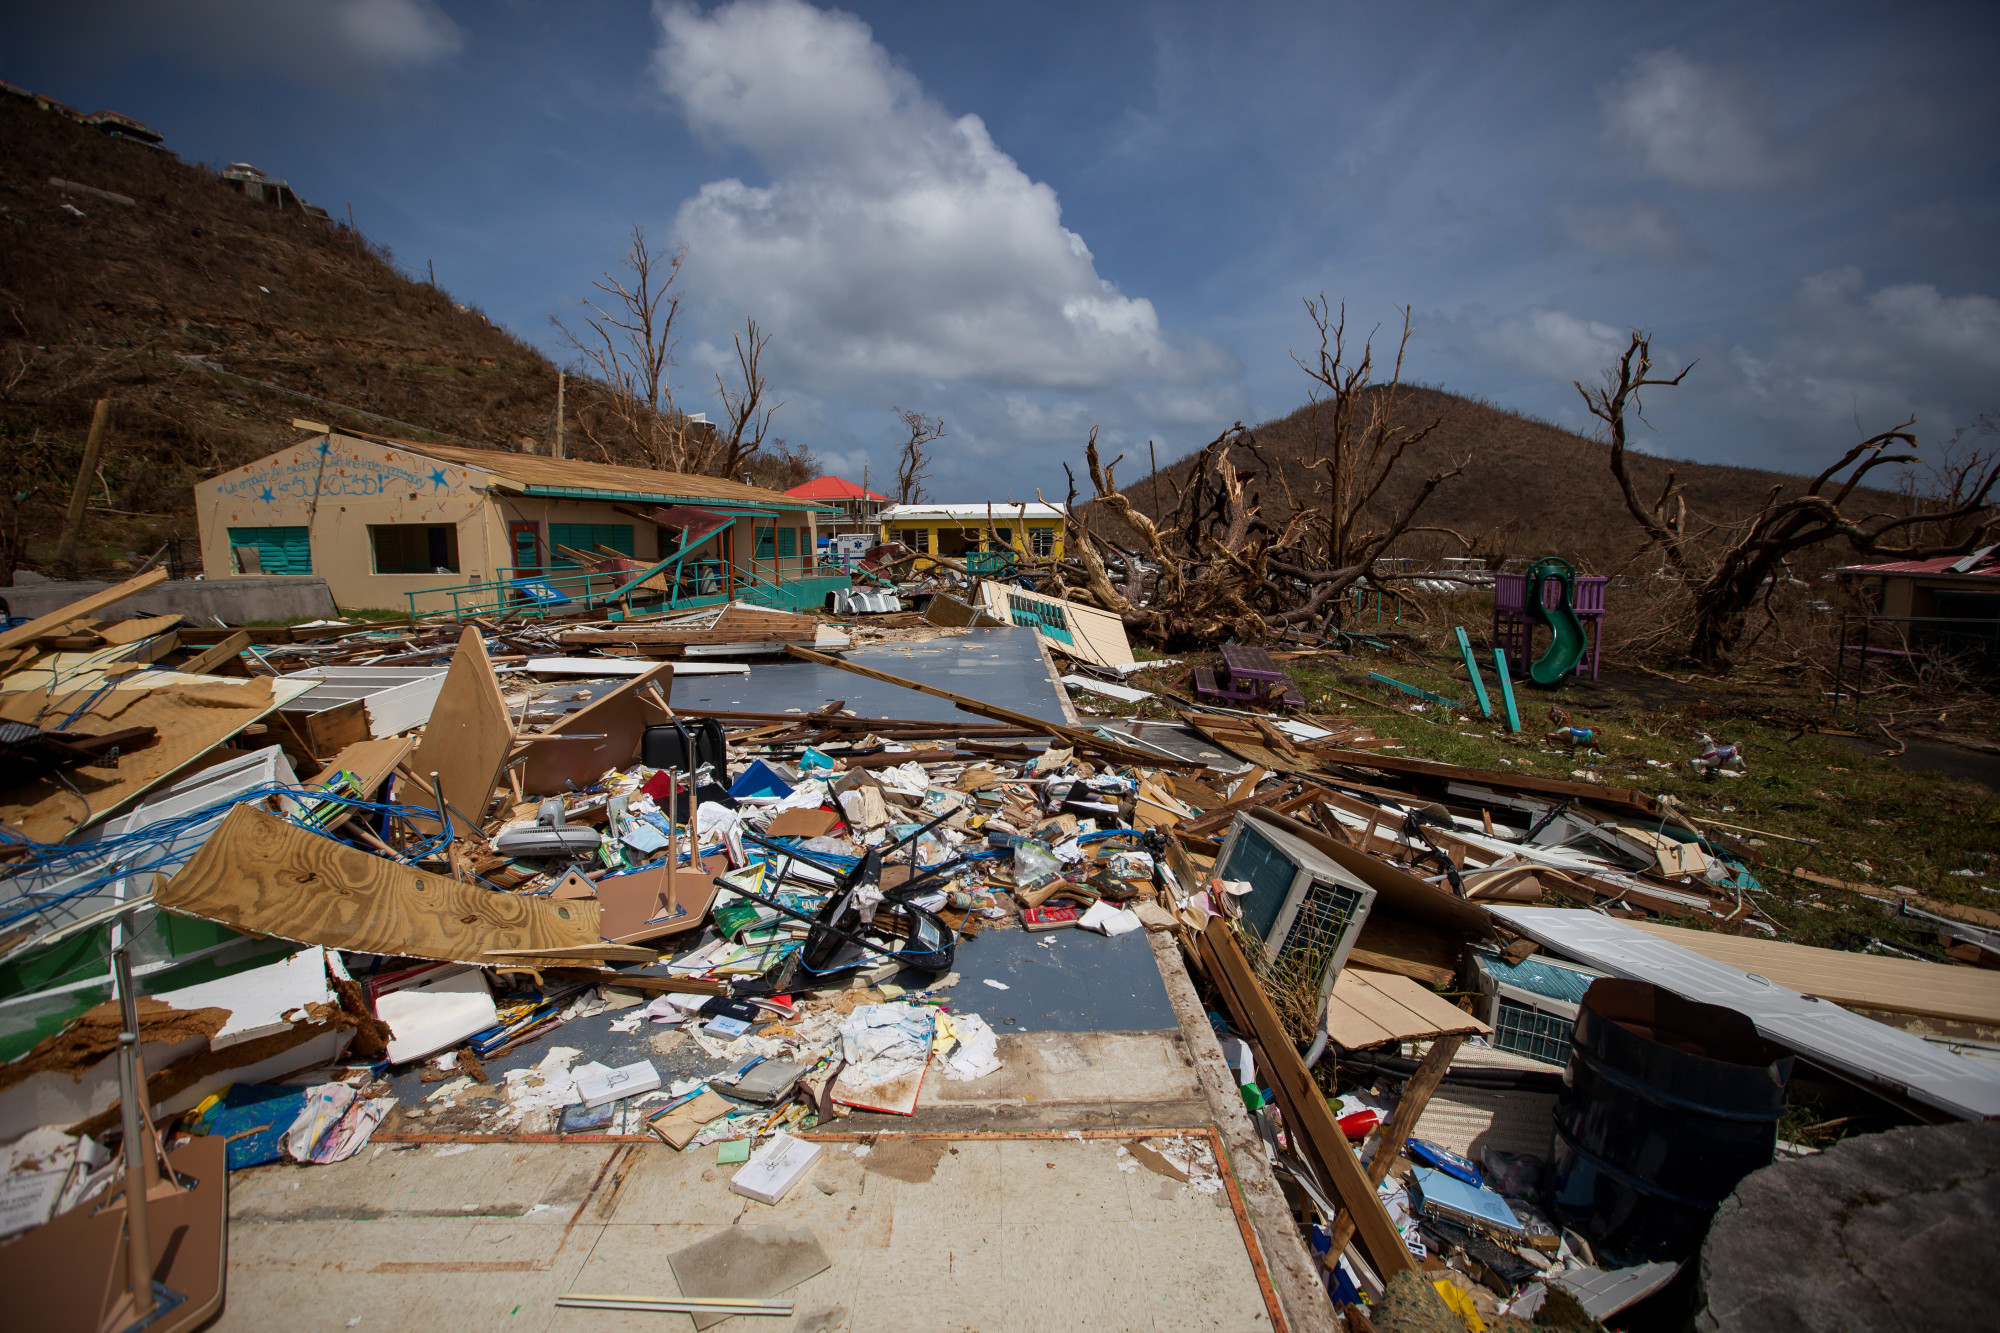 Debris sits in front of a damaged school after Hurricane Irma at Coral Bay in St John, U.S. Virgin Islands. Photographer: Michael Nagle/Bloomberg